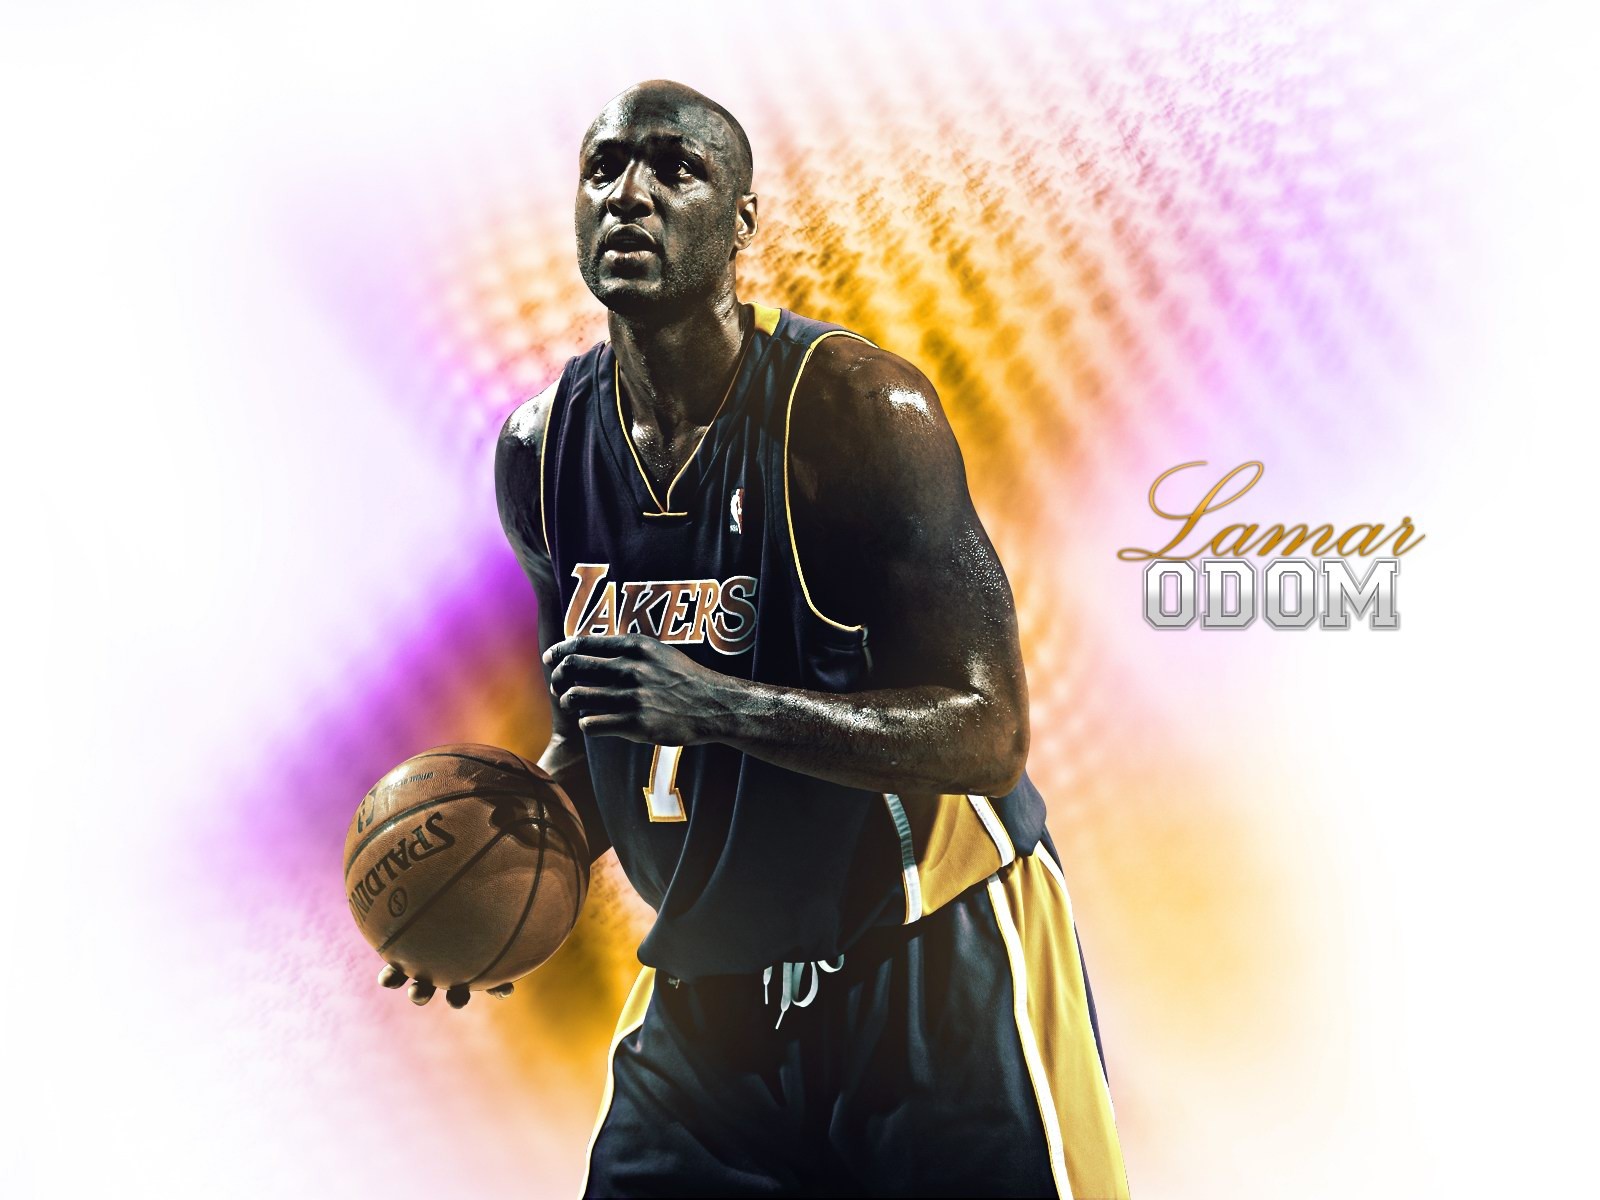 Los Angeles Lakers Official Wallpaper #17 - 1600x1200